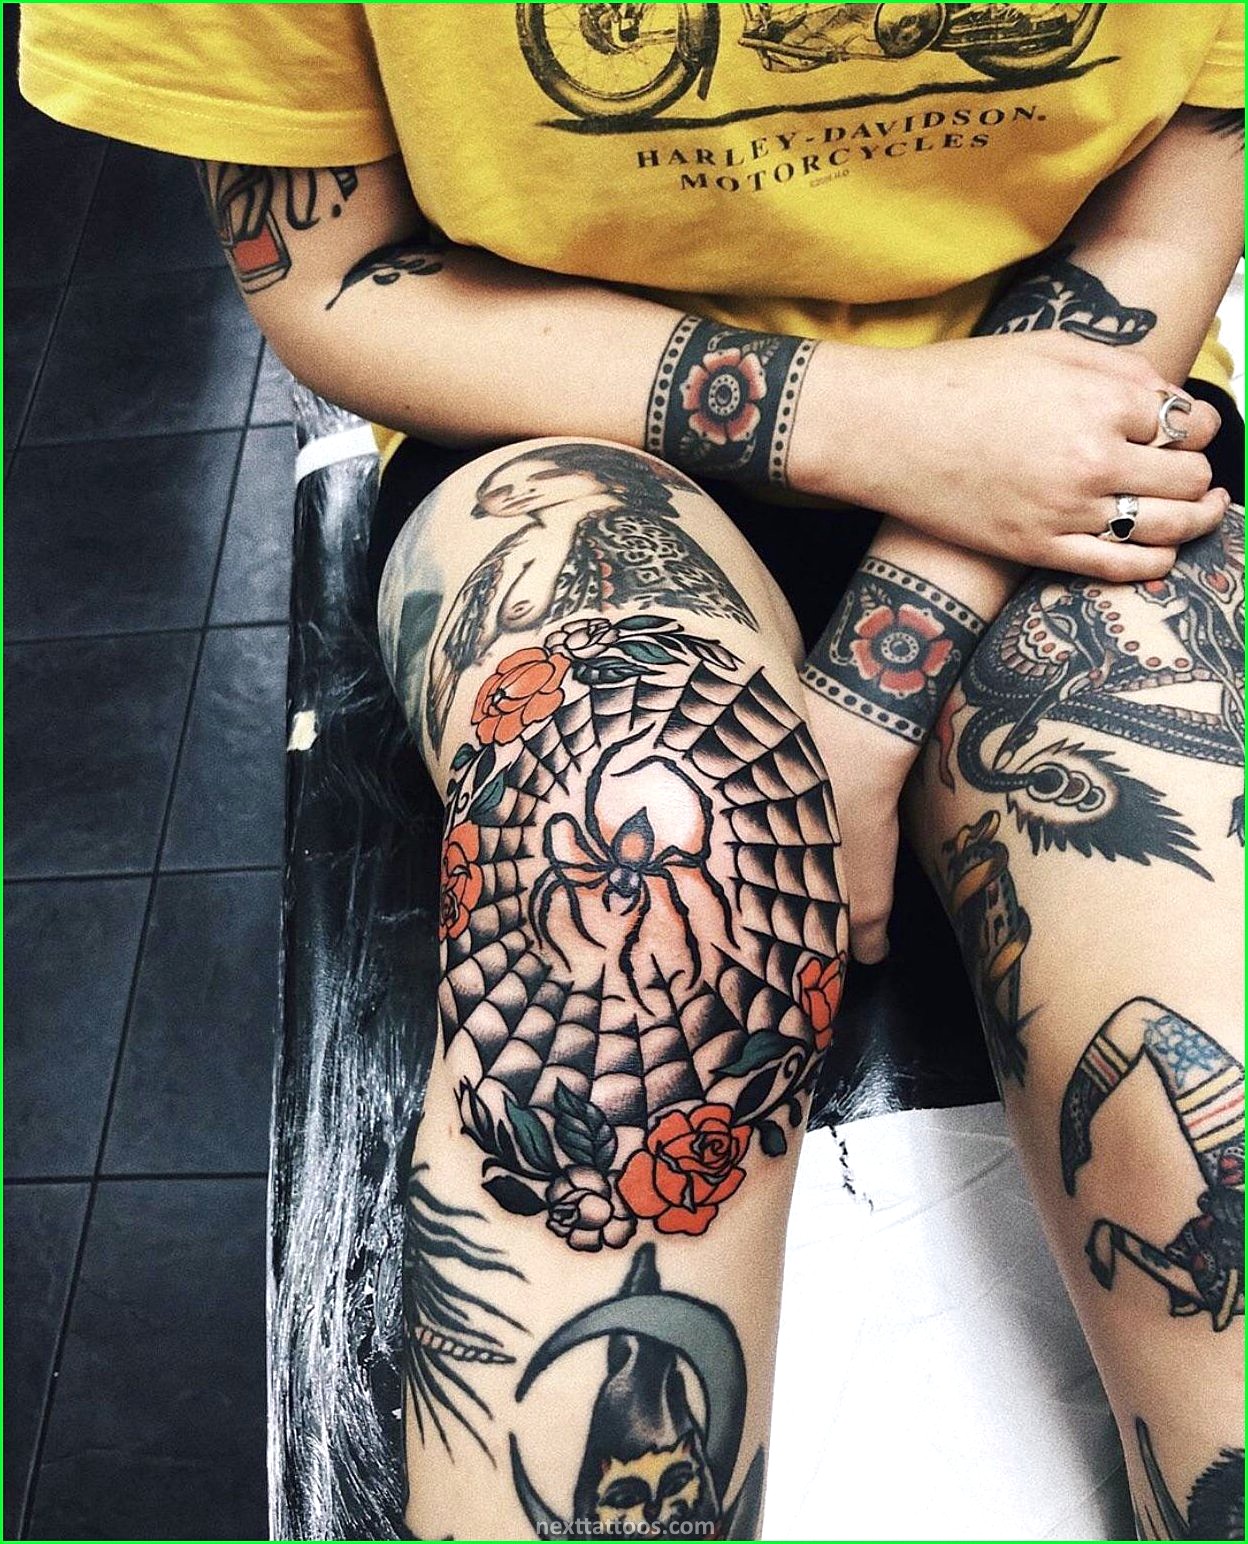 Knee Tattoos For Females - Find a Style That's Right For You